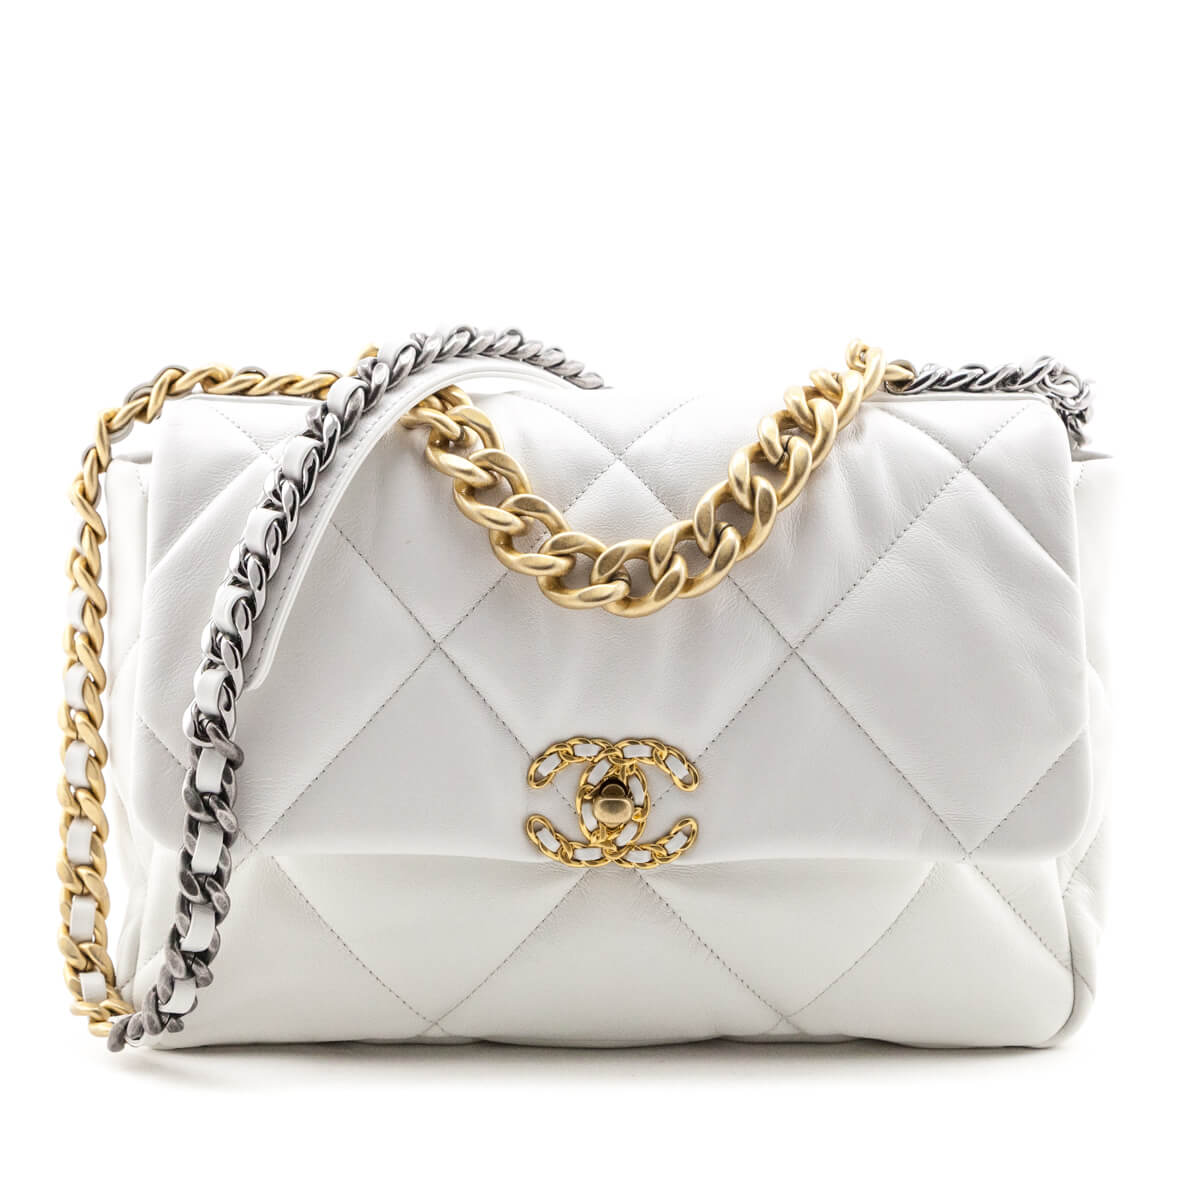 Chanel White Quilted Goatskin Chanel 19 Large Flap Bag - Love that Bag etc - Preowned Authentic Designer Handbags & Preloved Fashions